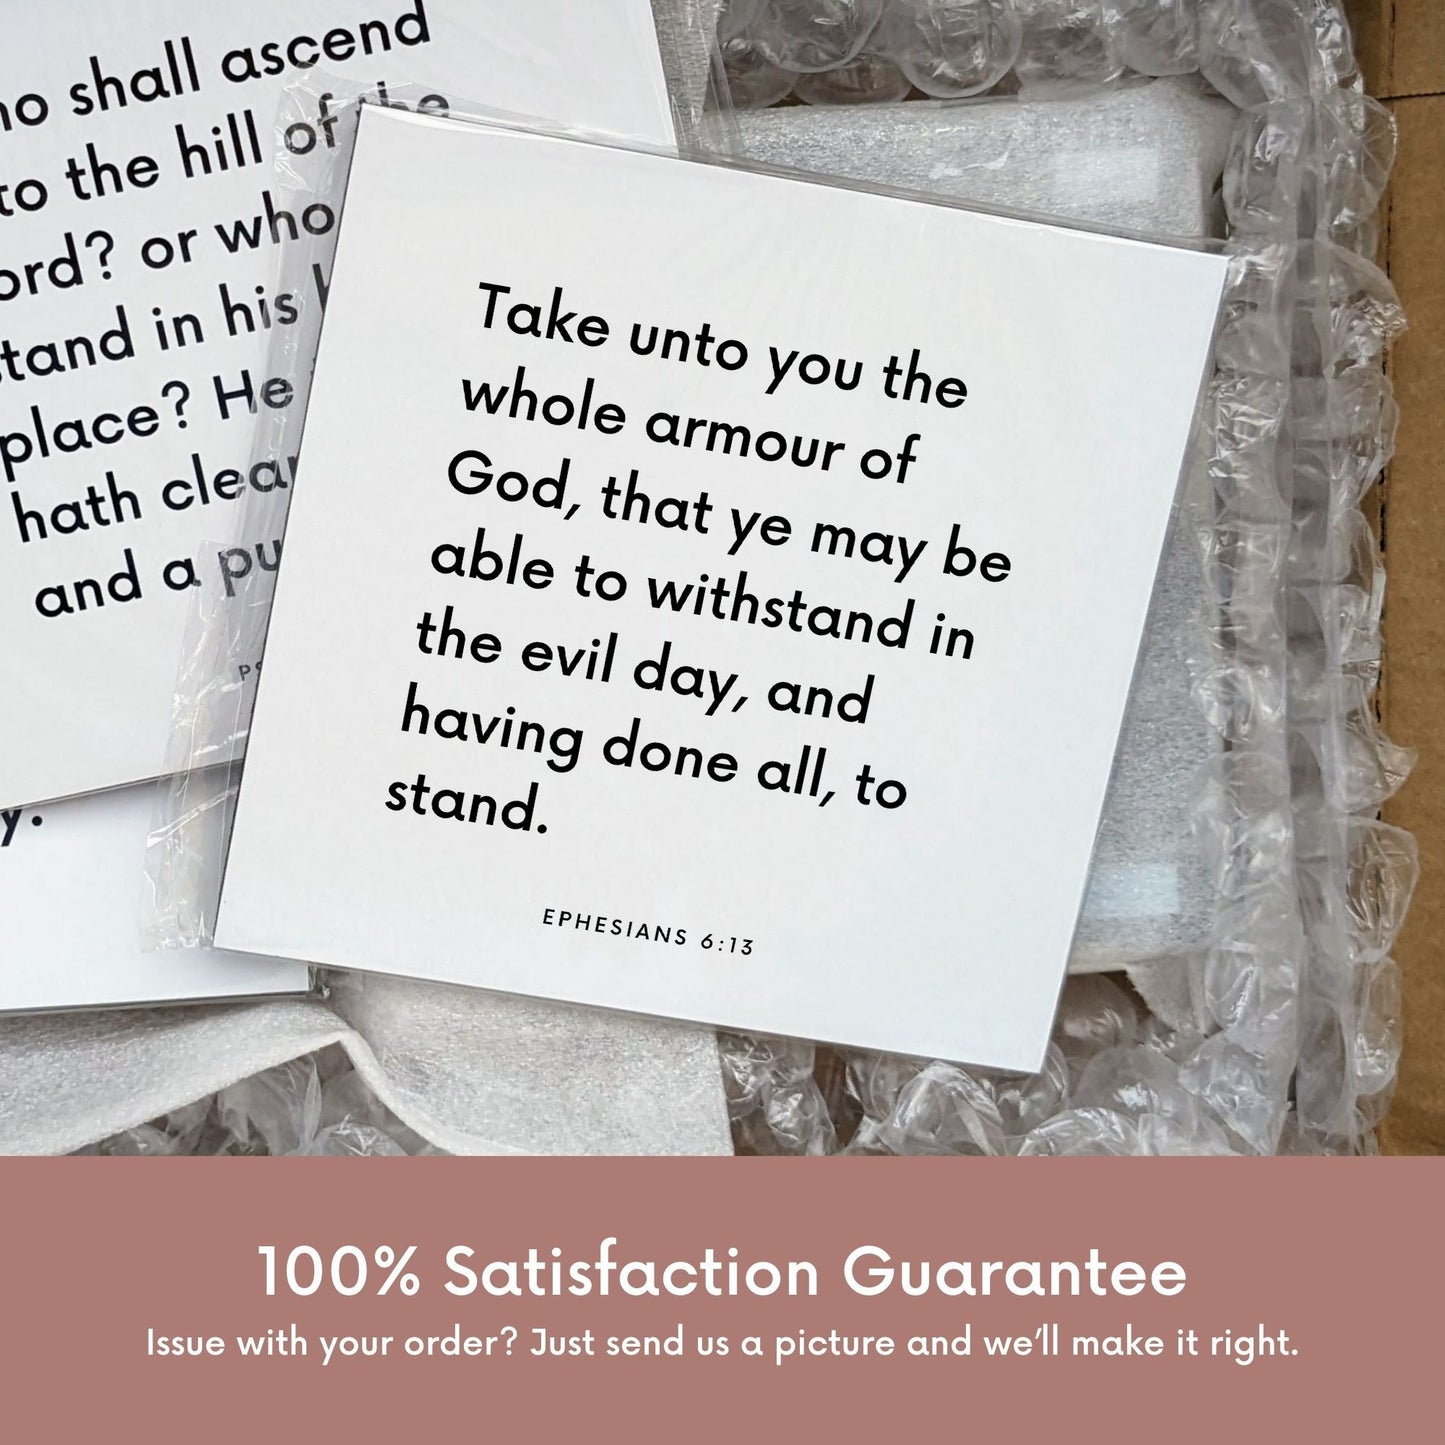 Shipping materials for scripture tile of Ephesians 6:13 - "Take unto you the whole armour of God"